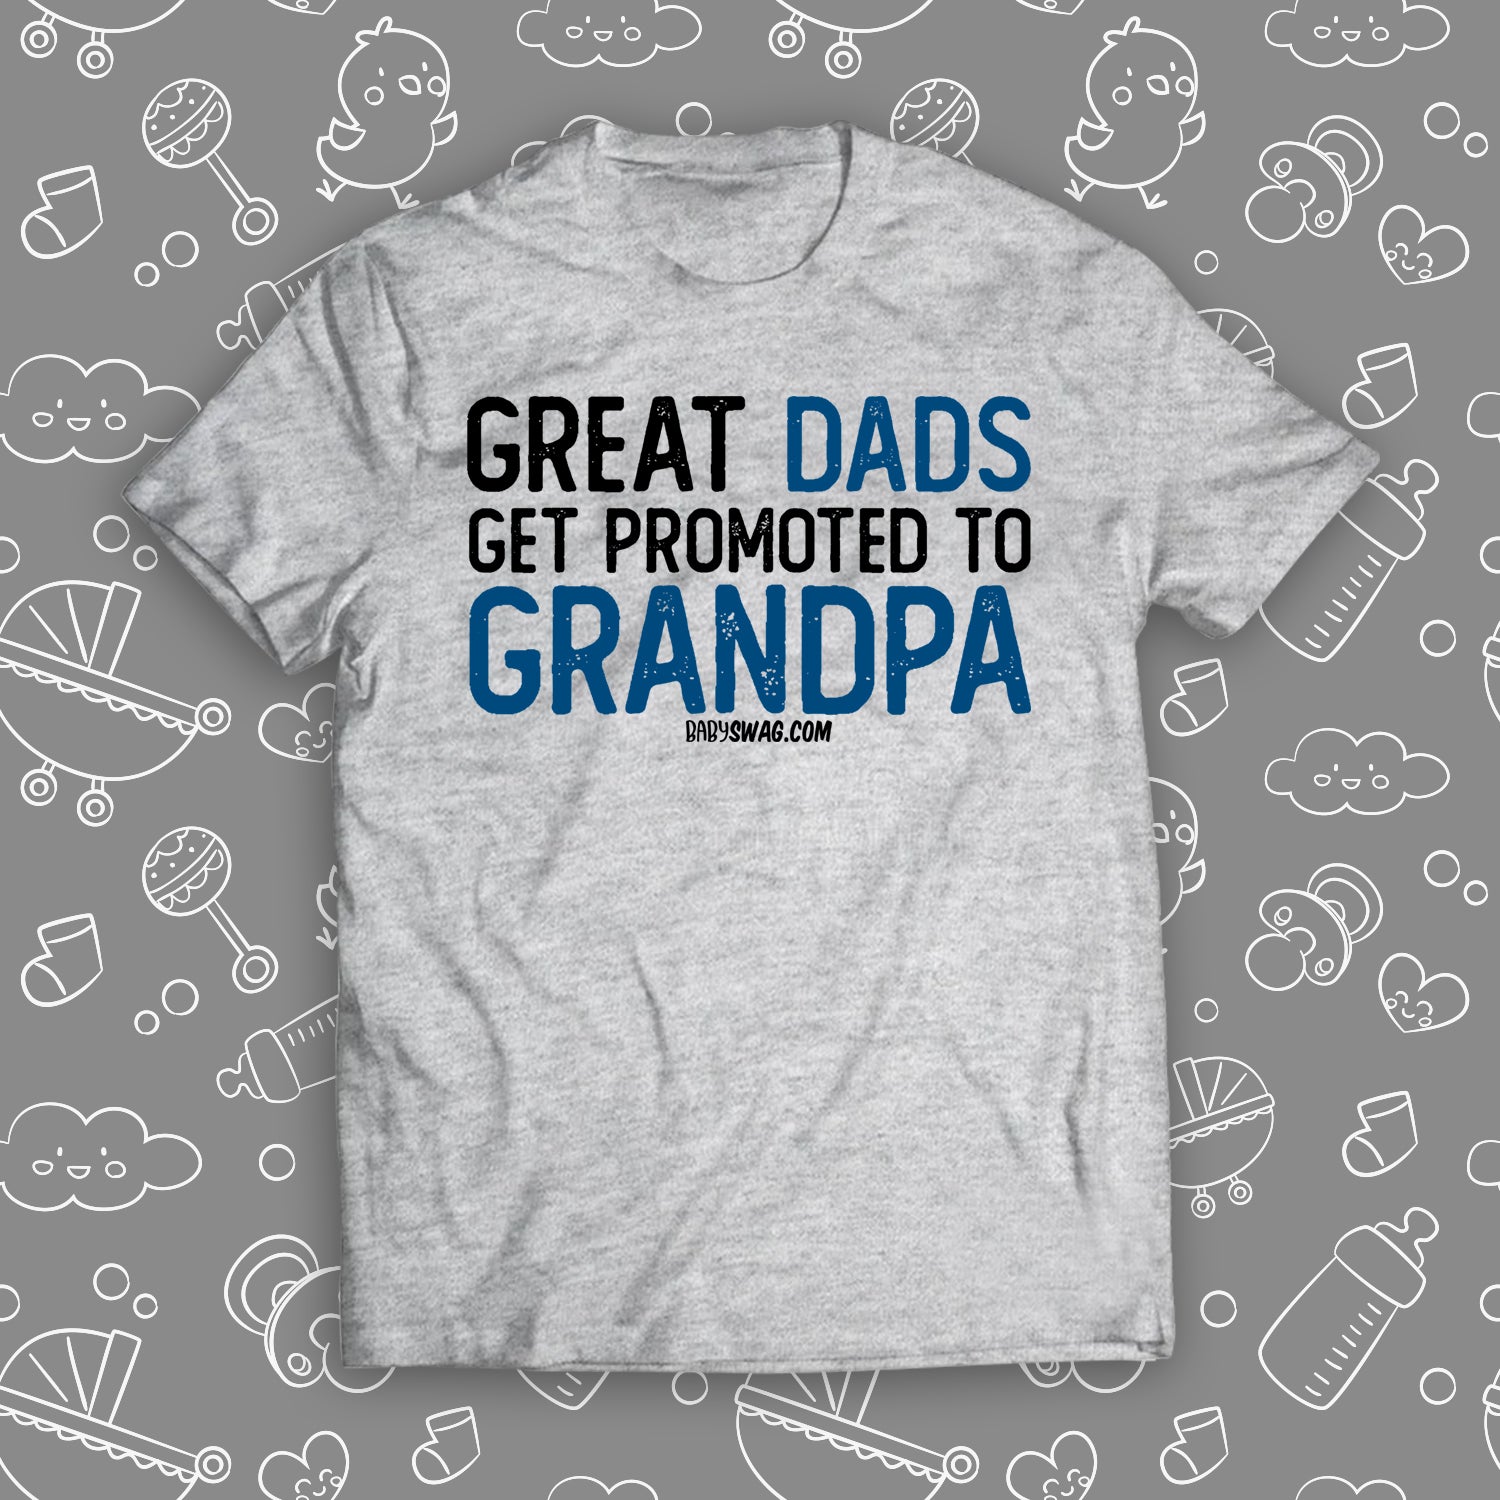 Great Dads Get Promoted To Grandpa – Baby Swag